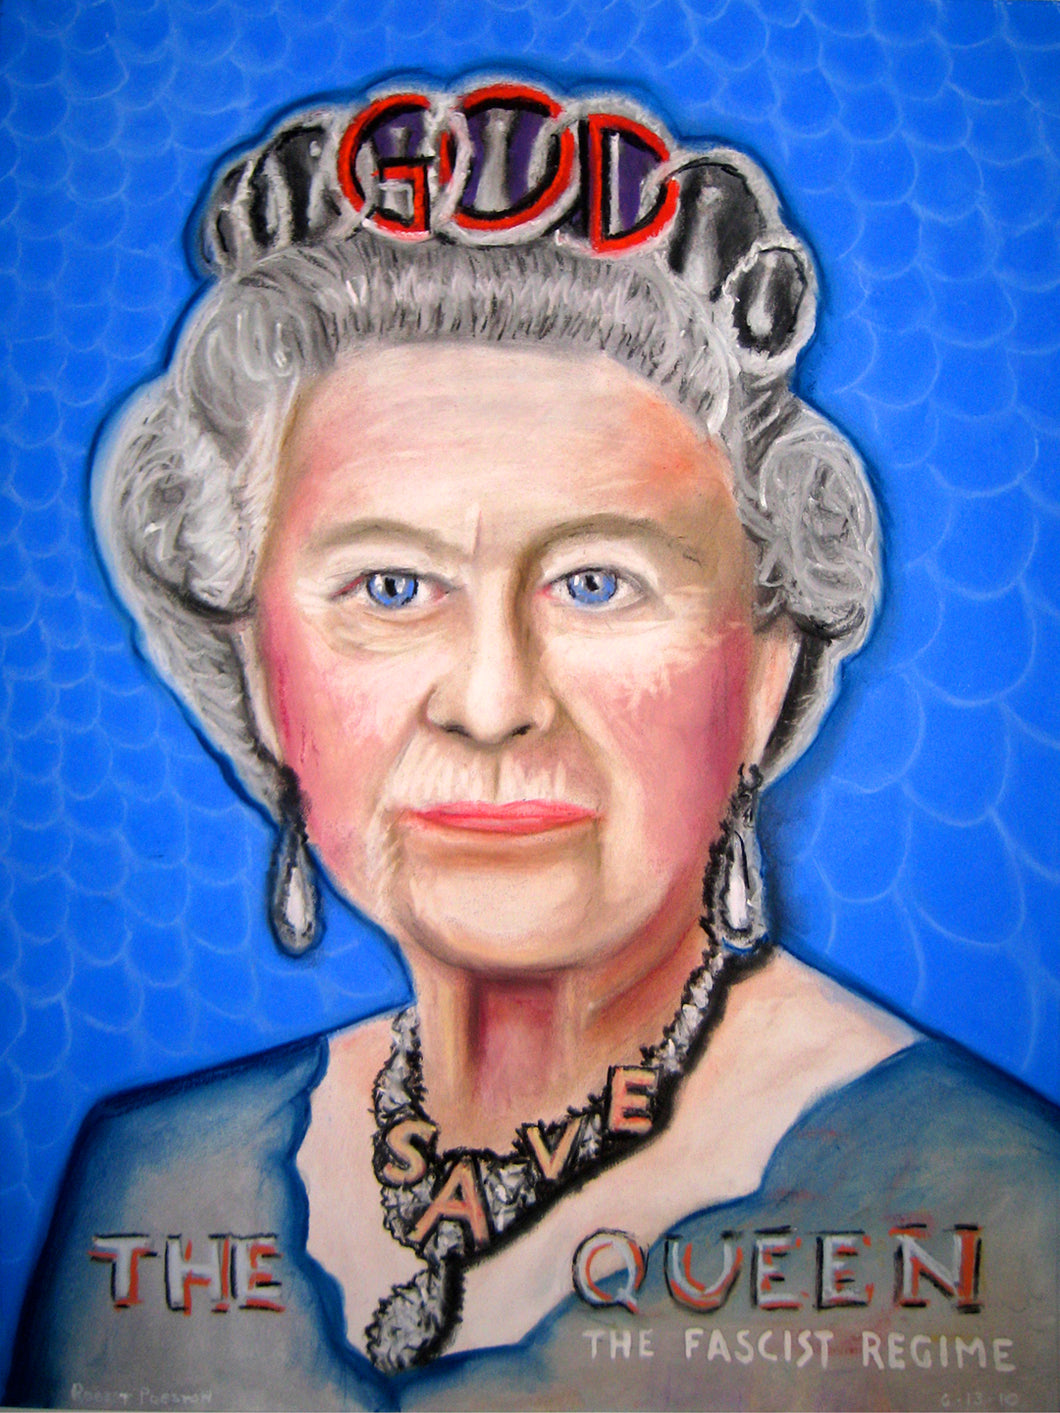 God Save the Queen of the Fascist Regime